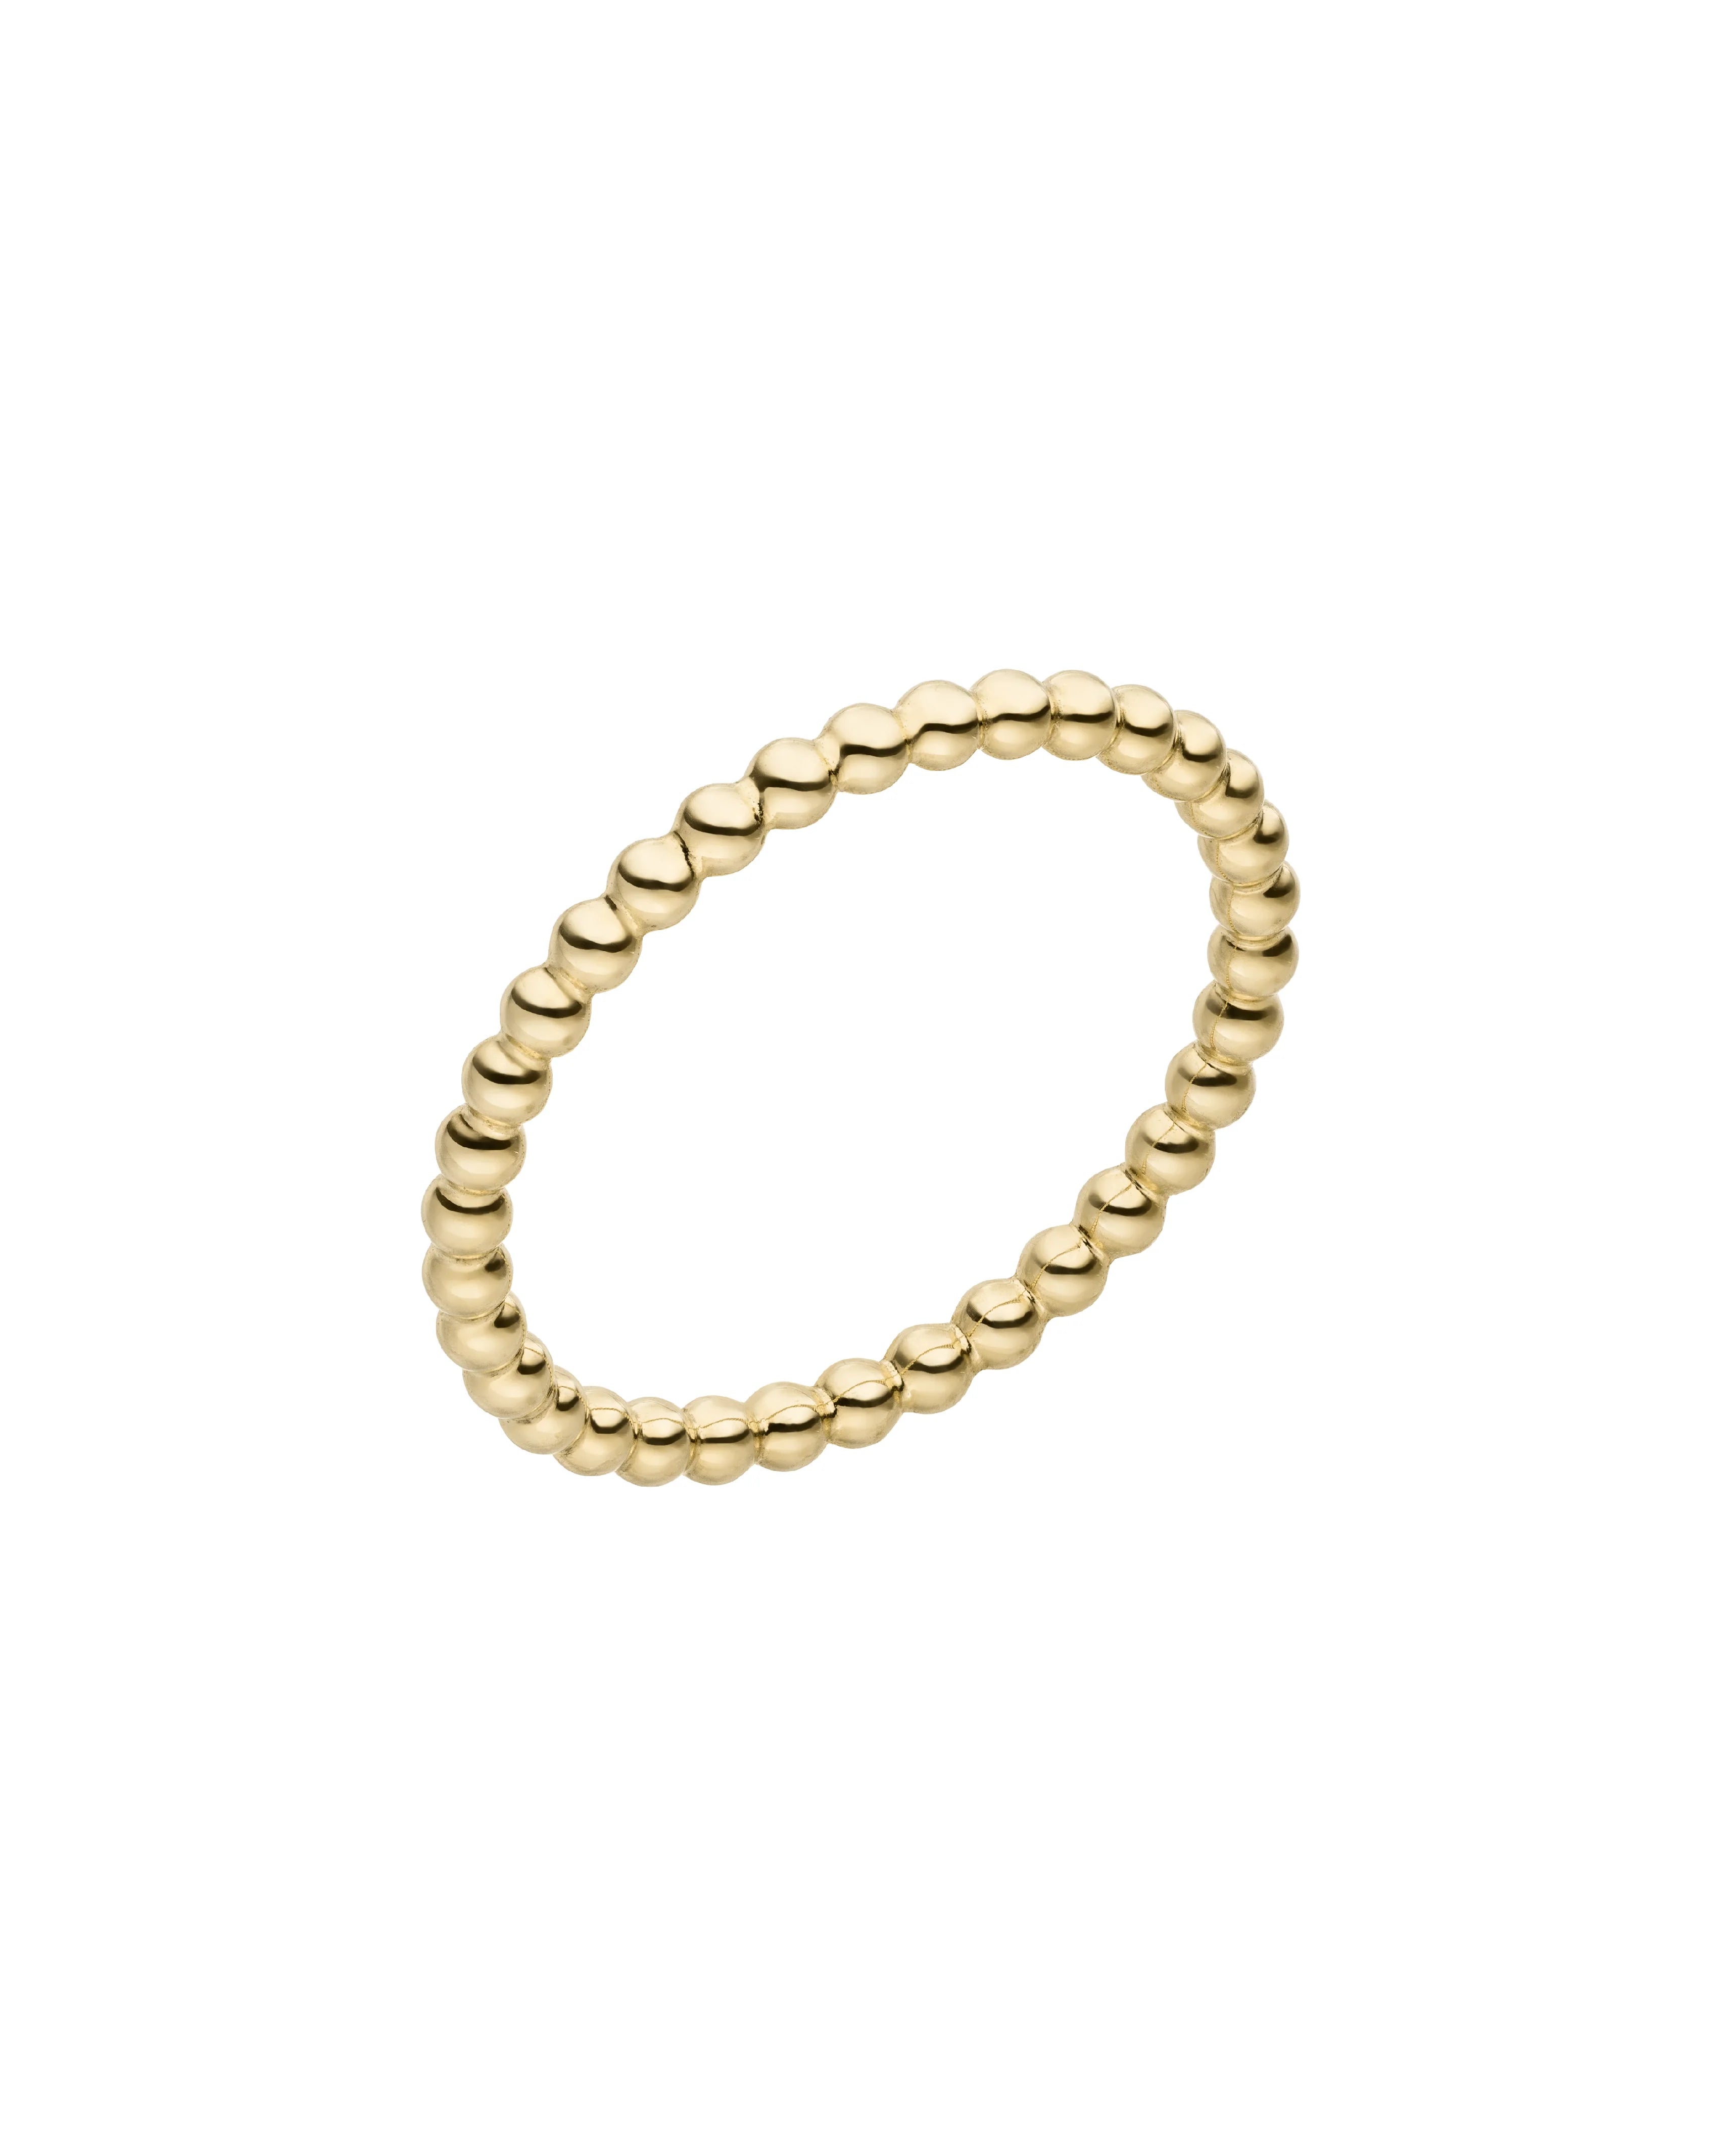 BOLA - Gold Ring - Gelbgold 585